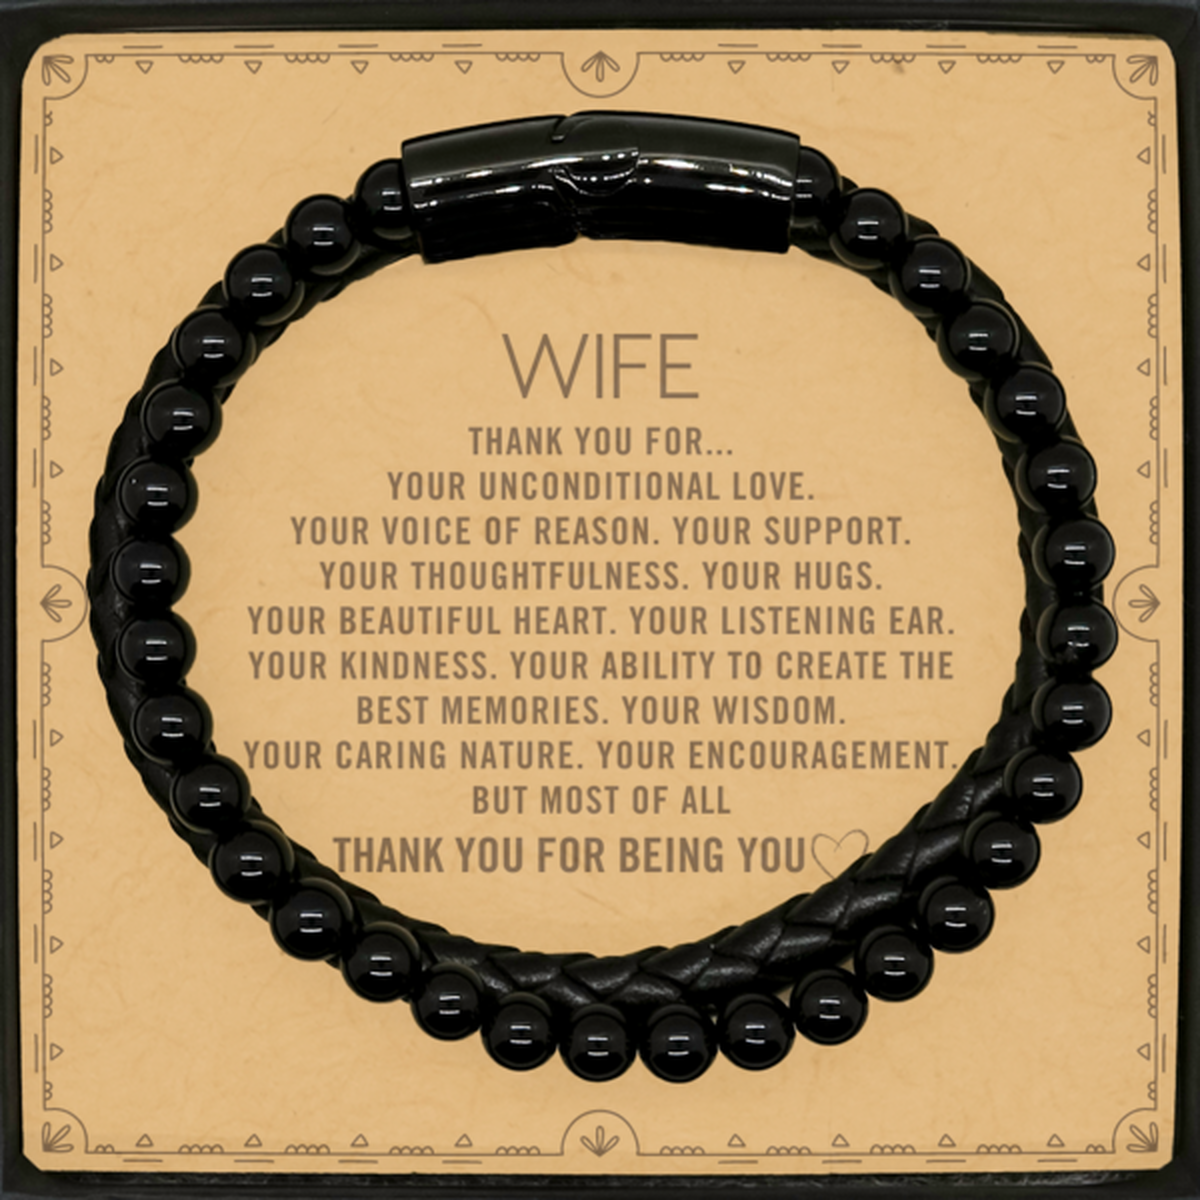 Wife Stone Leather Bracelets Custom, Message Card Gifts For Wife Christmas Graduation Birthday Gifts for Men Women Wife Thank you for Your unconditional love